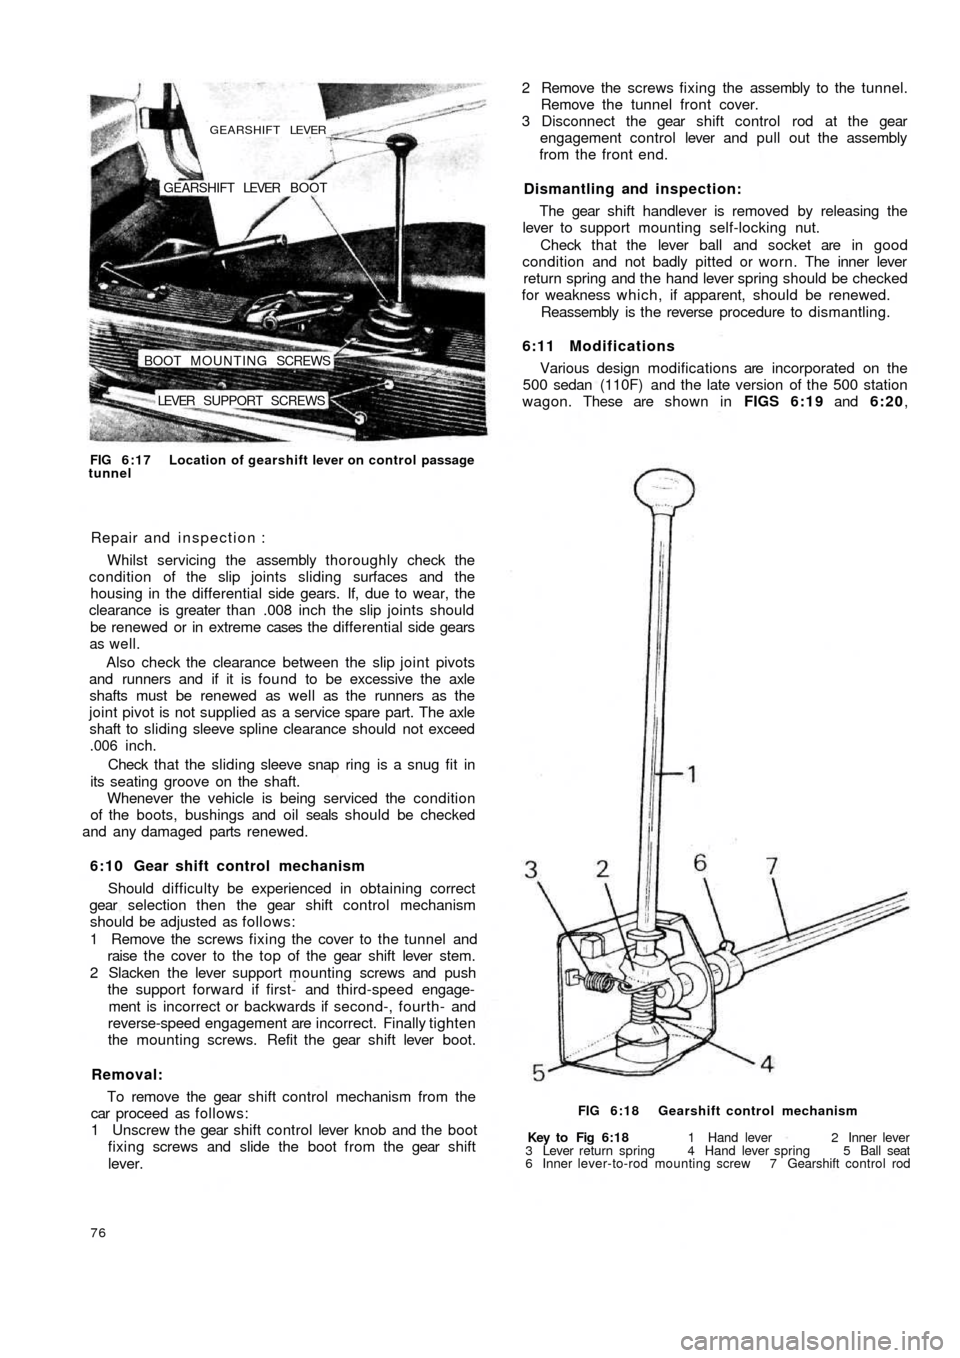 FIAT 500 1957 1.G Repair Manual LEVER  SUPPORT SCREWS BOOT MOUNTING SCREWSGEARSHIFT LEVER  BOOT
GEARSHIFT LEVER
FIG 6:17 Location of gearshift lever on control  passage
tunnel
Repair and inspection :
Whilst servicing the assembly th